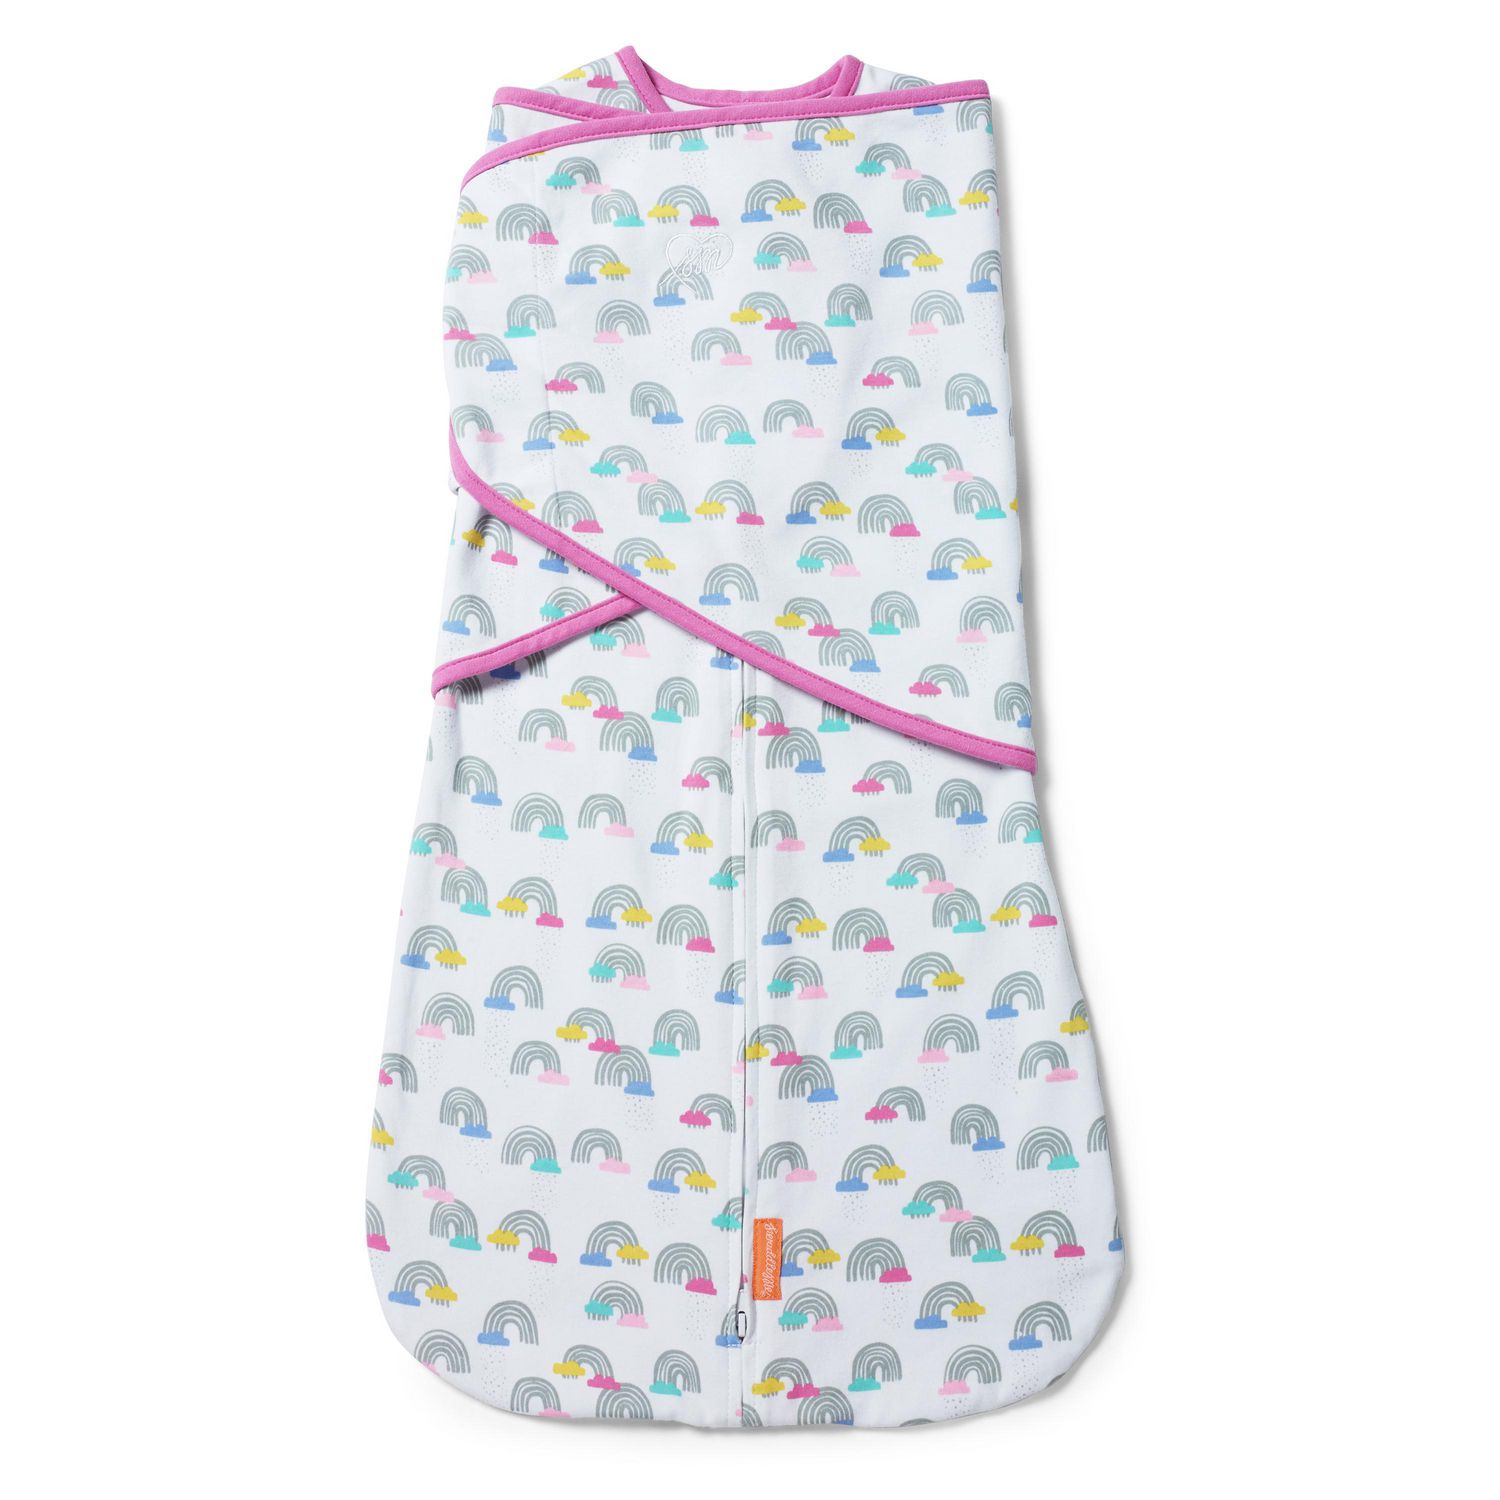 Summer Infant SwaddleMe Arms Free Convertible Swaddle Wrap 1 pk